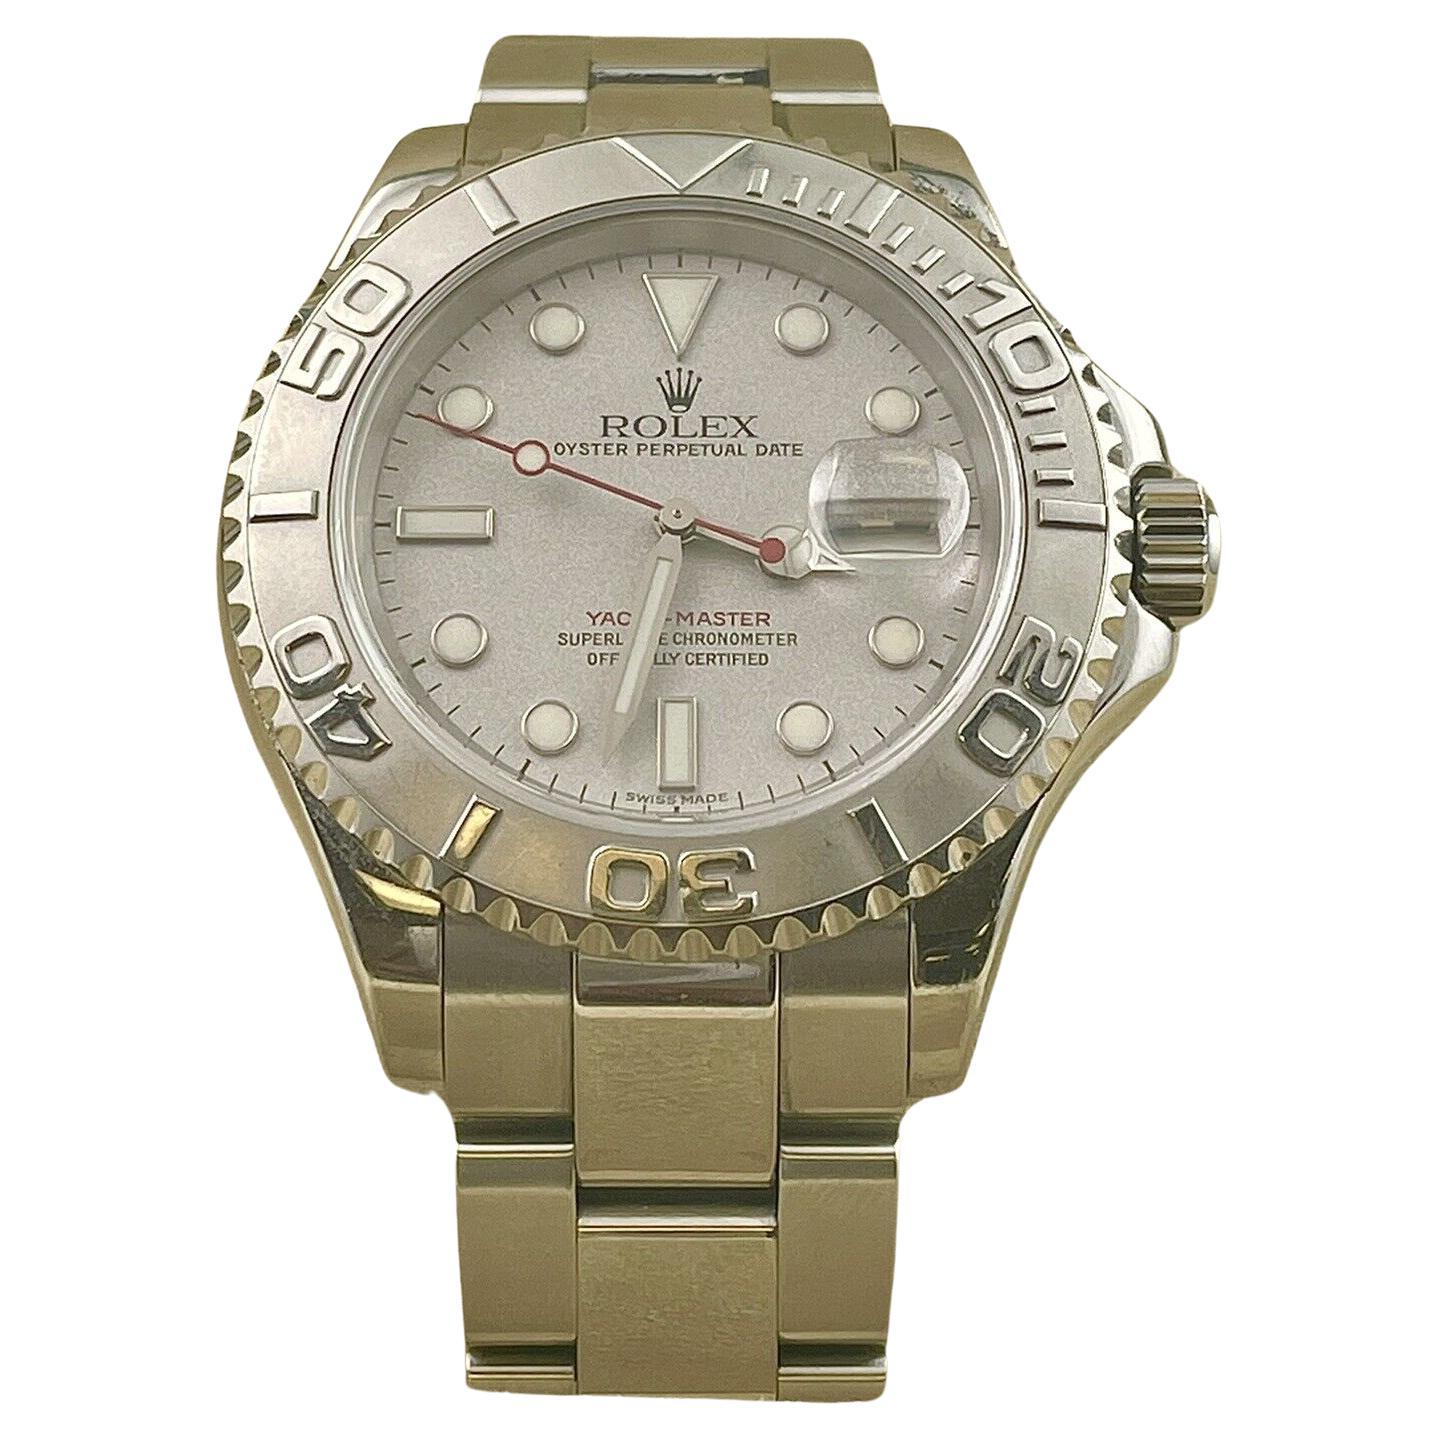 Rolex 40mm Yacht-Master Oyster Perpetual Date Platinum Dial Ref 16622 For Sale